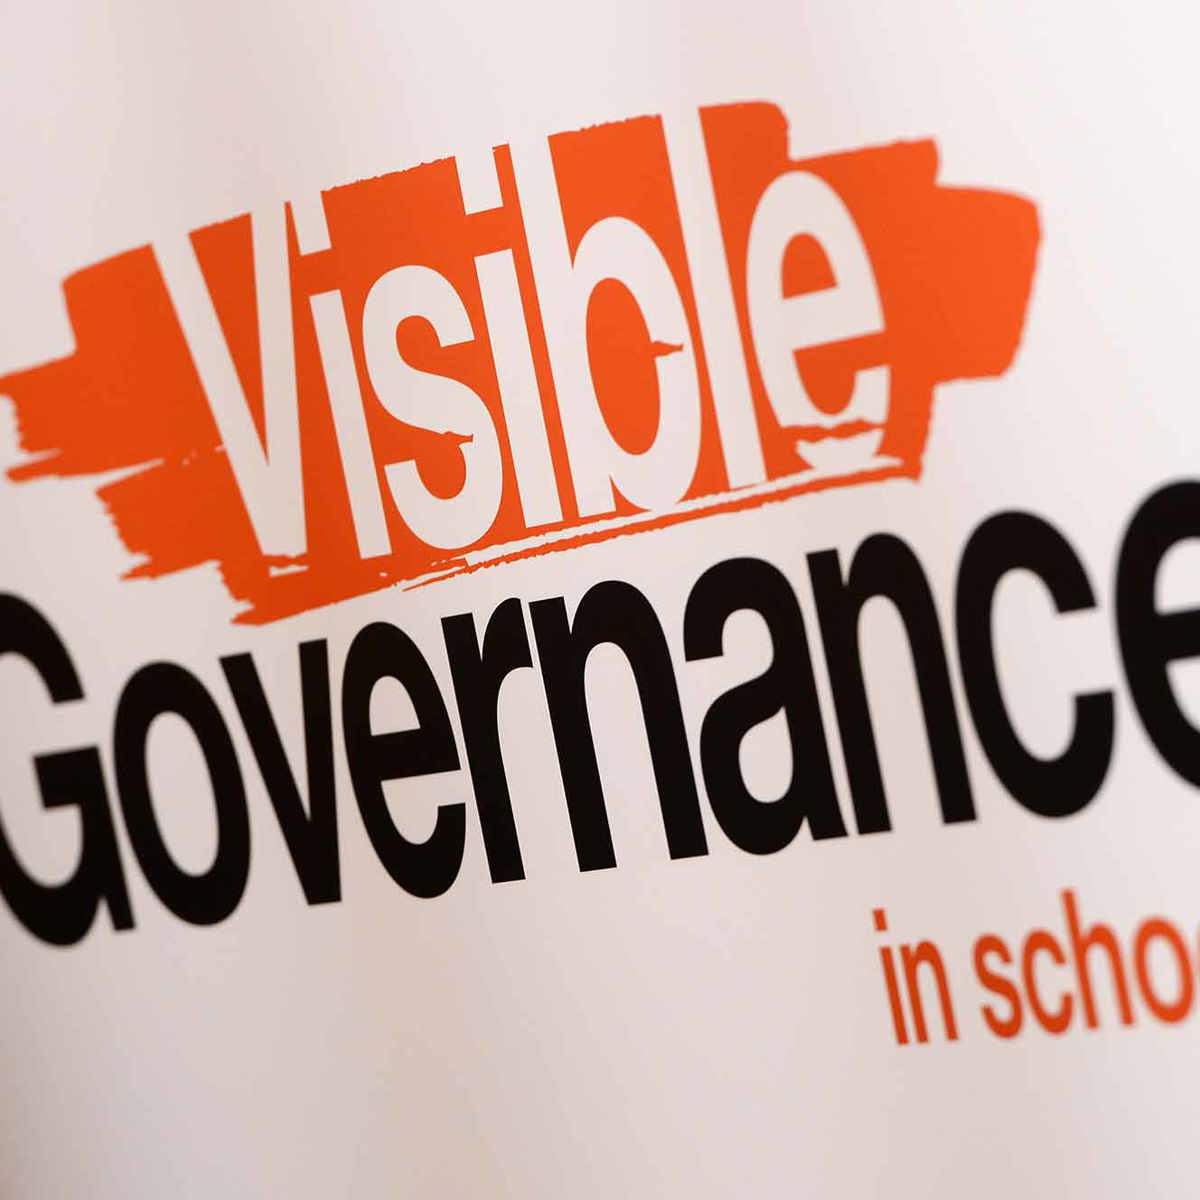 news-views sign saying Visible governance in schools